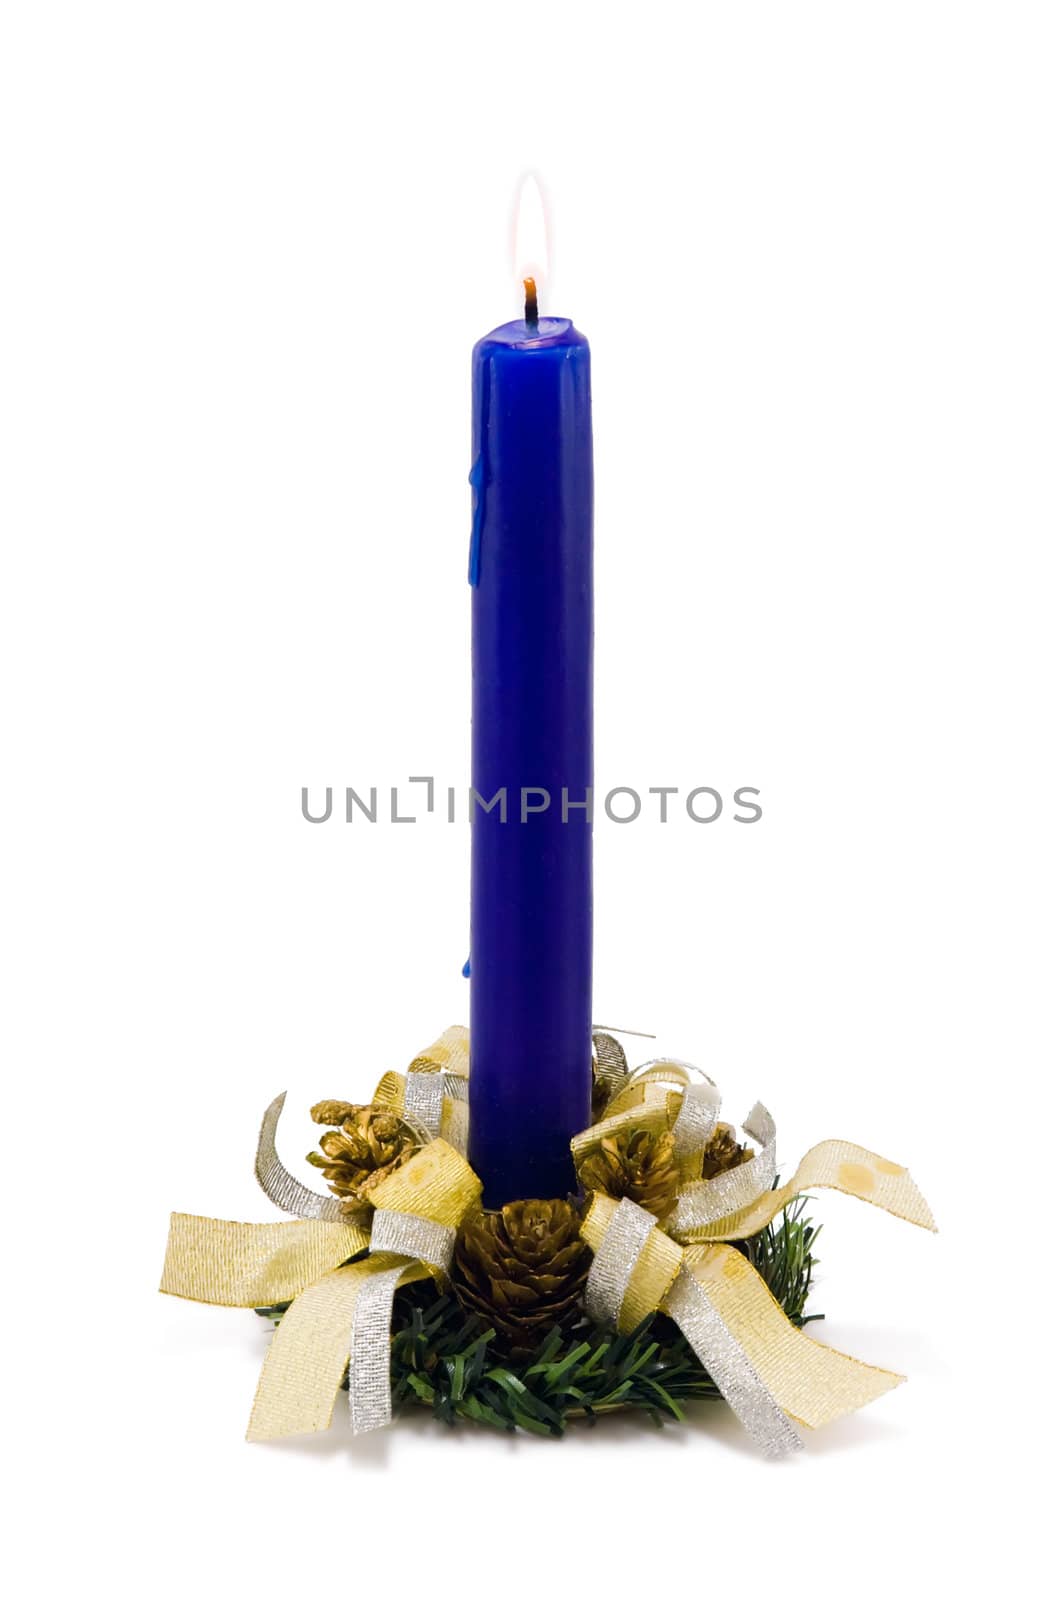 A blue candle decorated with candlestick and ribbons